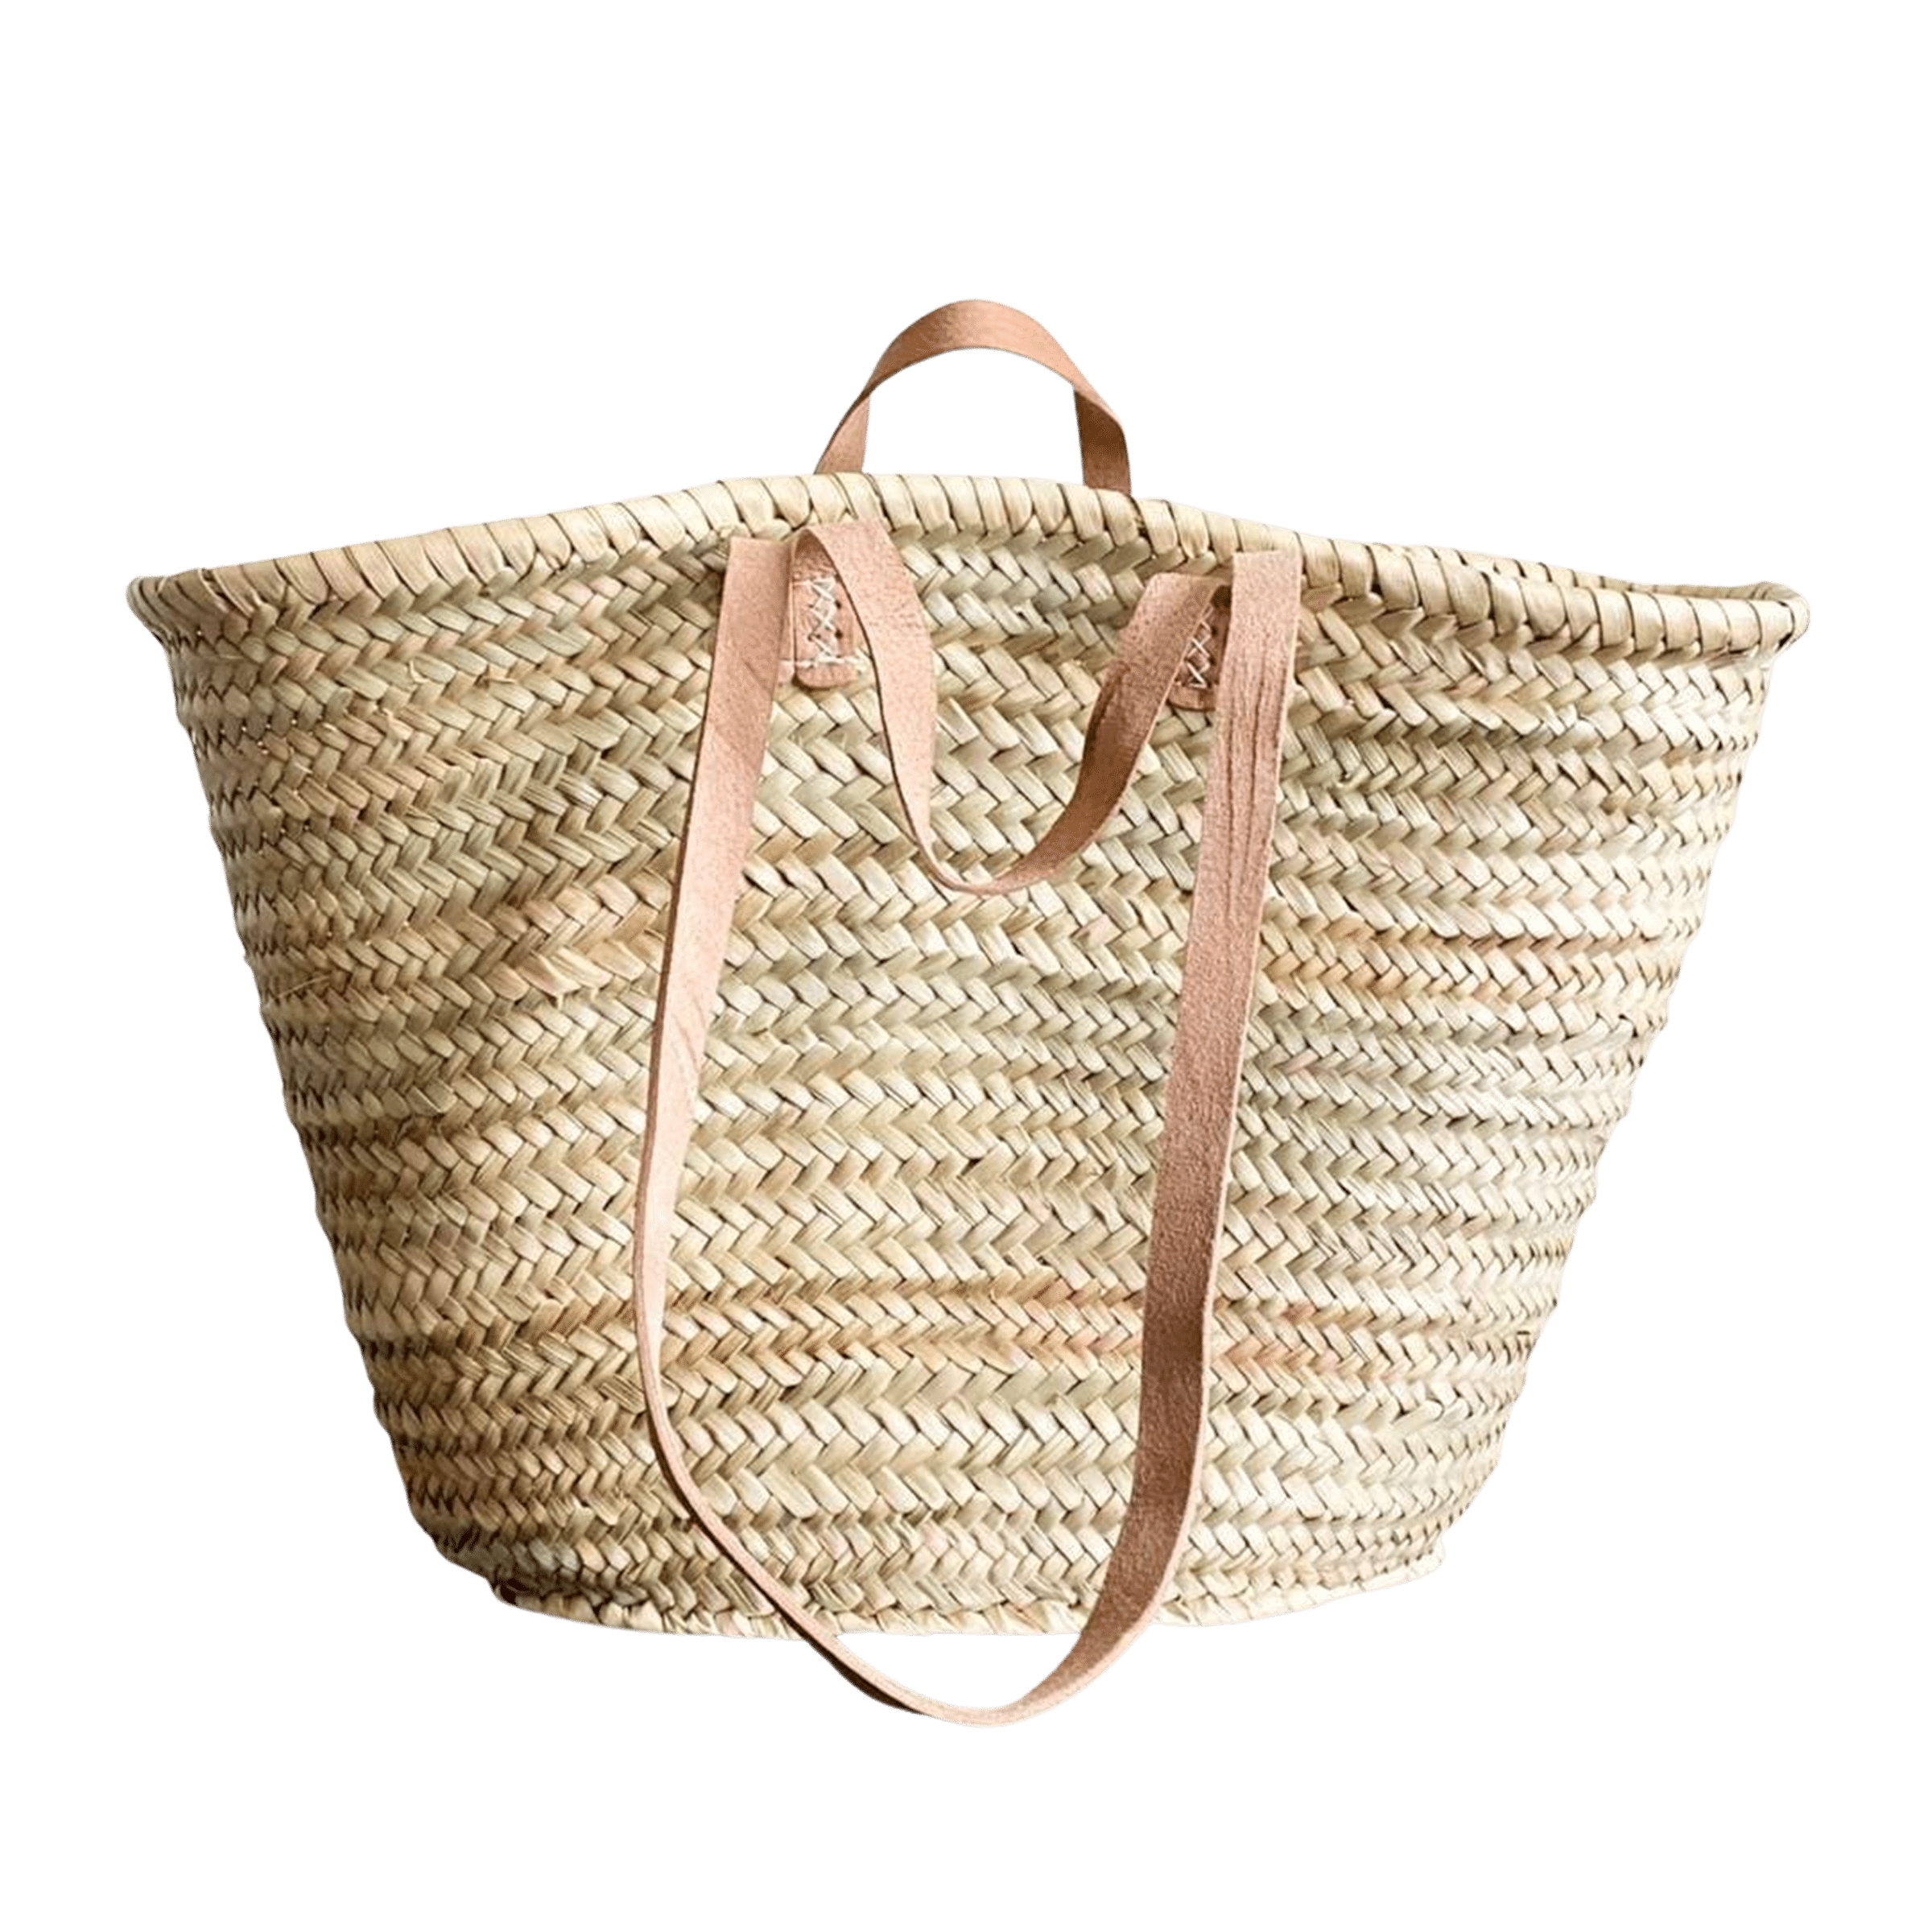 Handmade French Market Backpack Basket with Tan or Brown Leather Handles